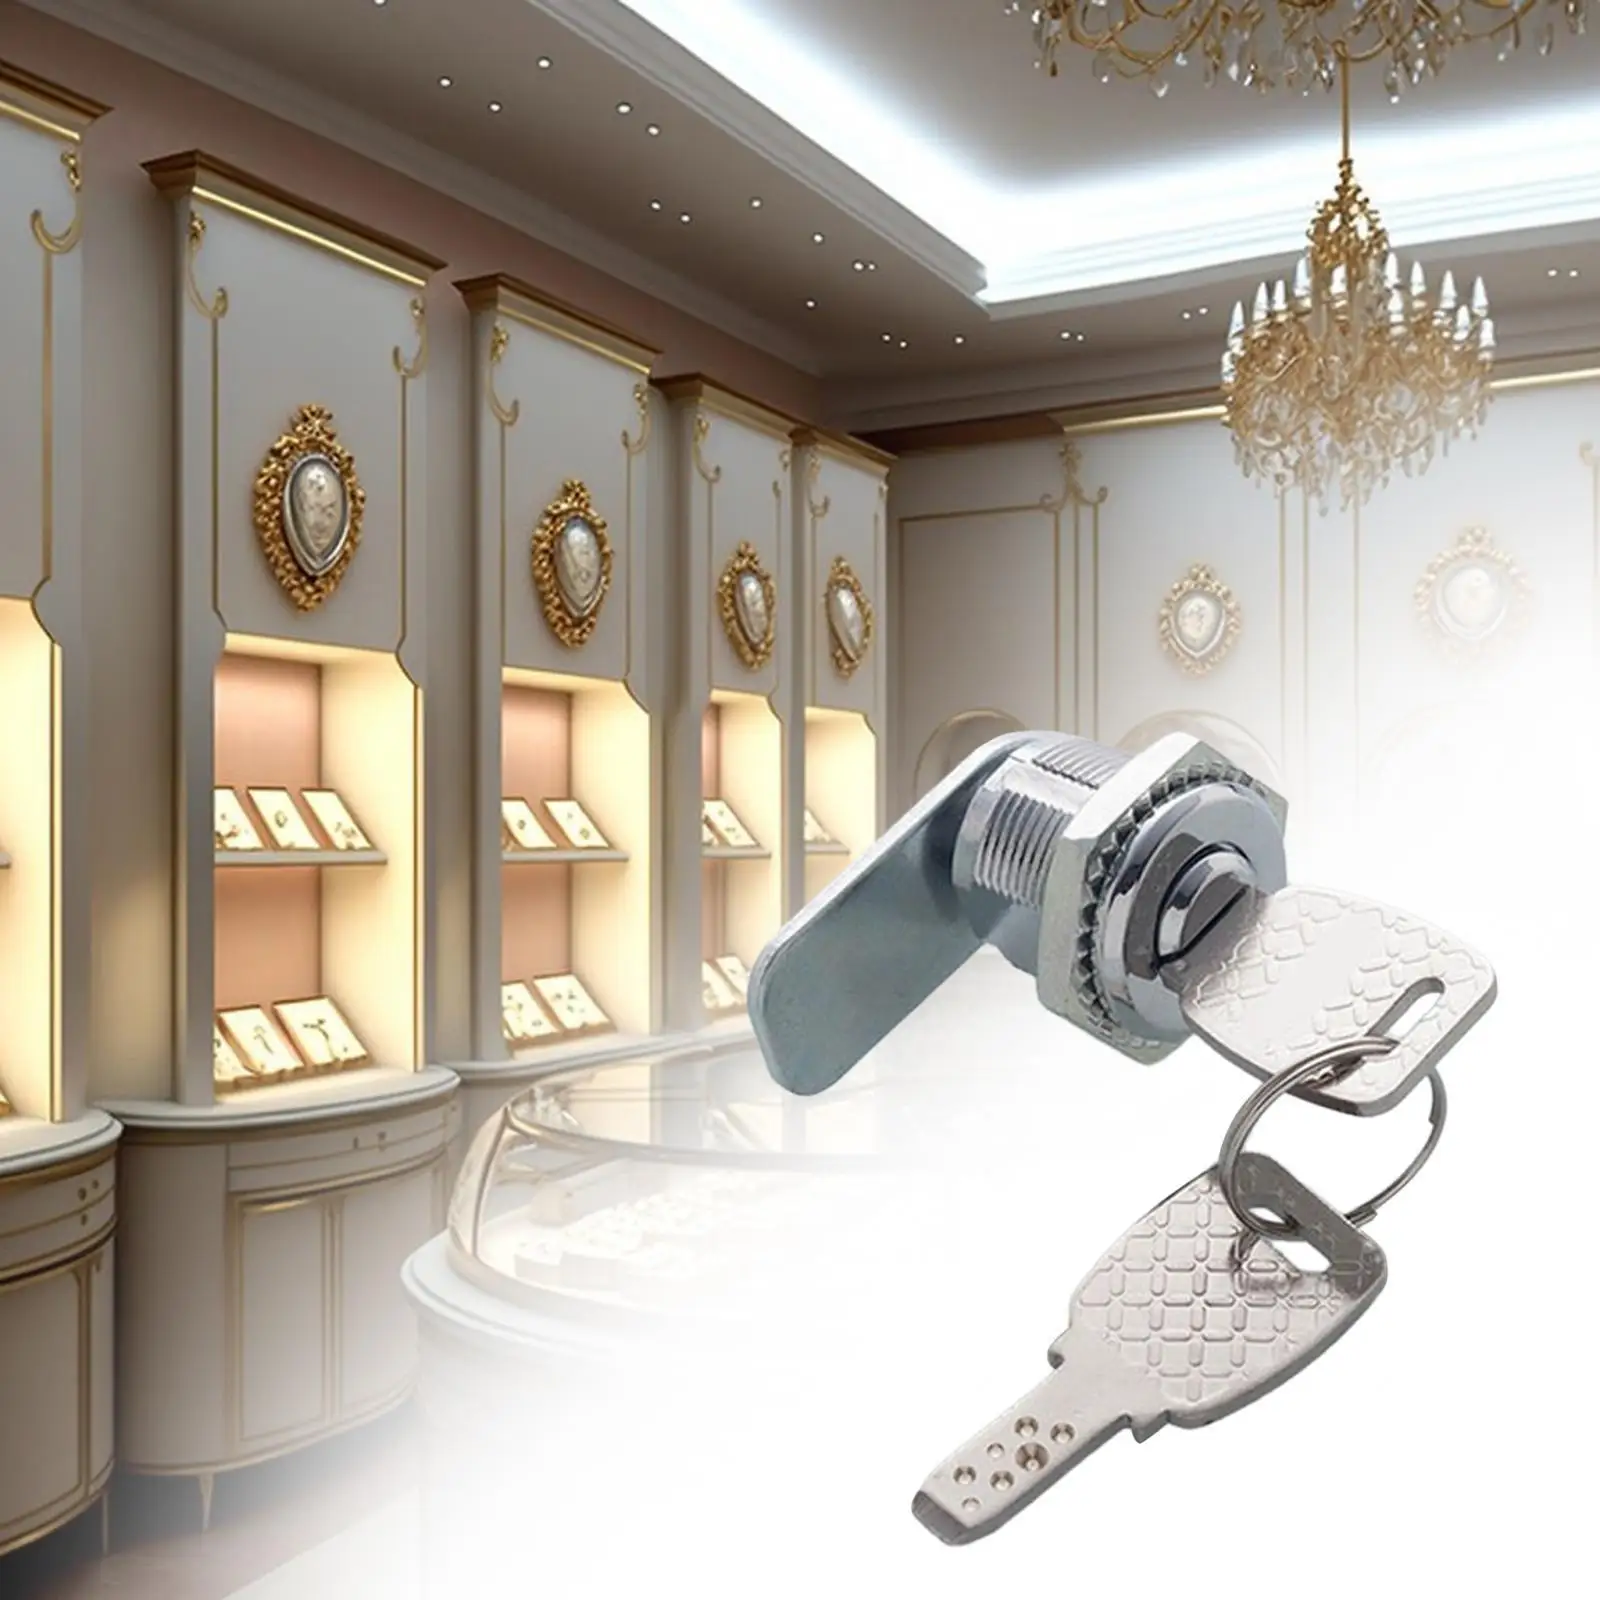 Cabinet cam Lock Hardware Zinc Alloy for Postal Box File Drawer Pay Phone